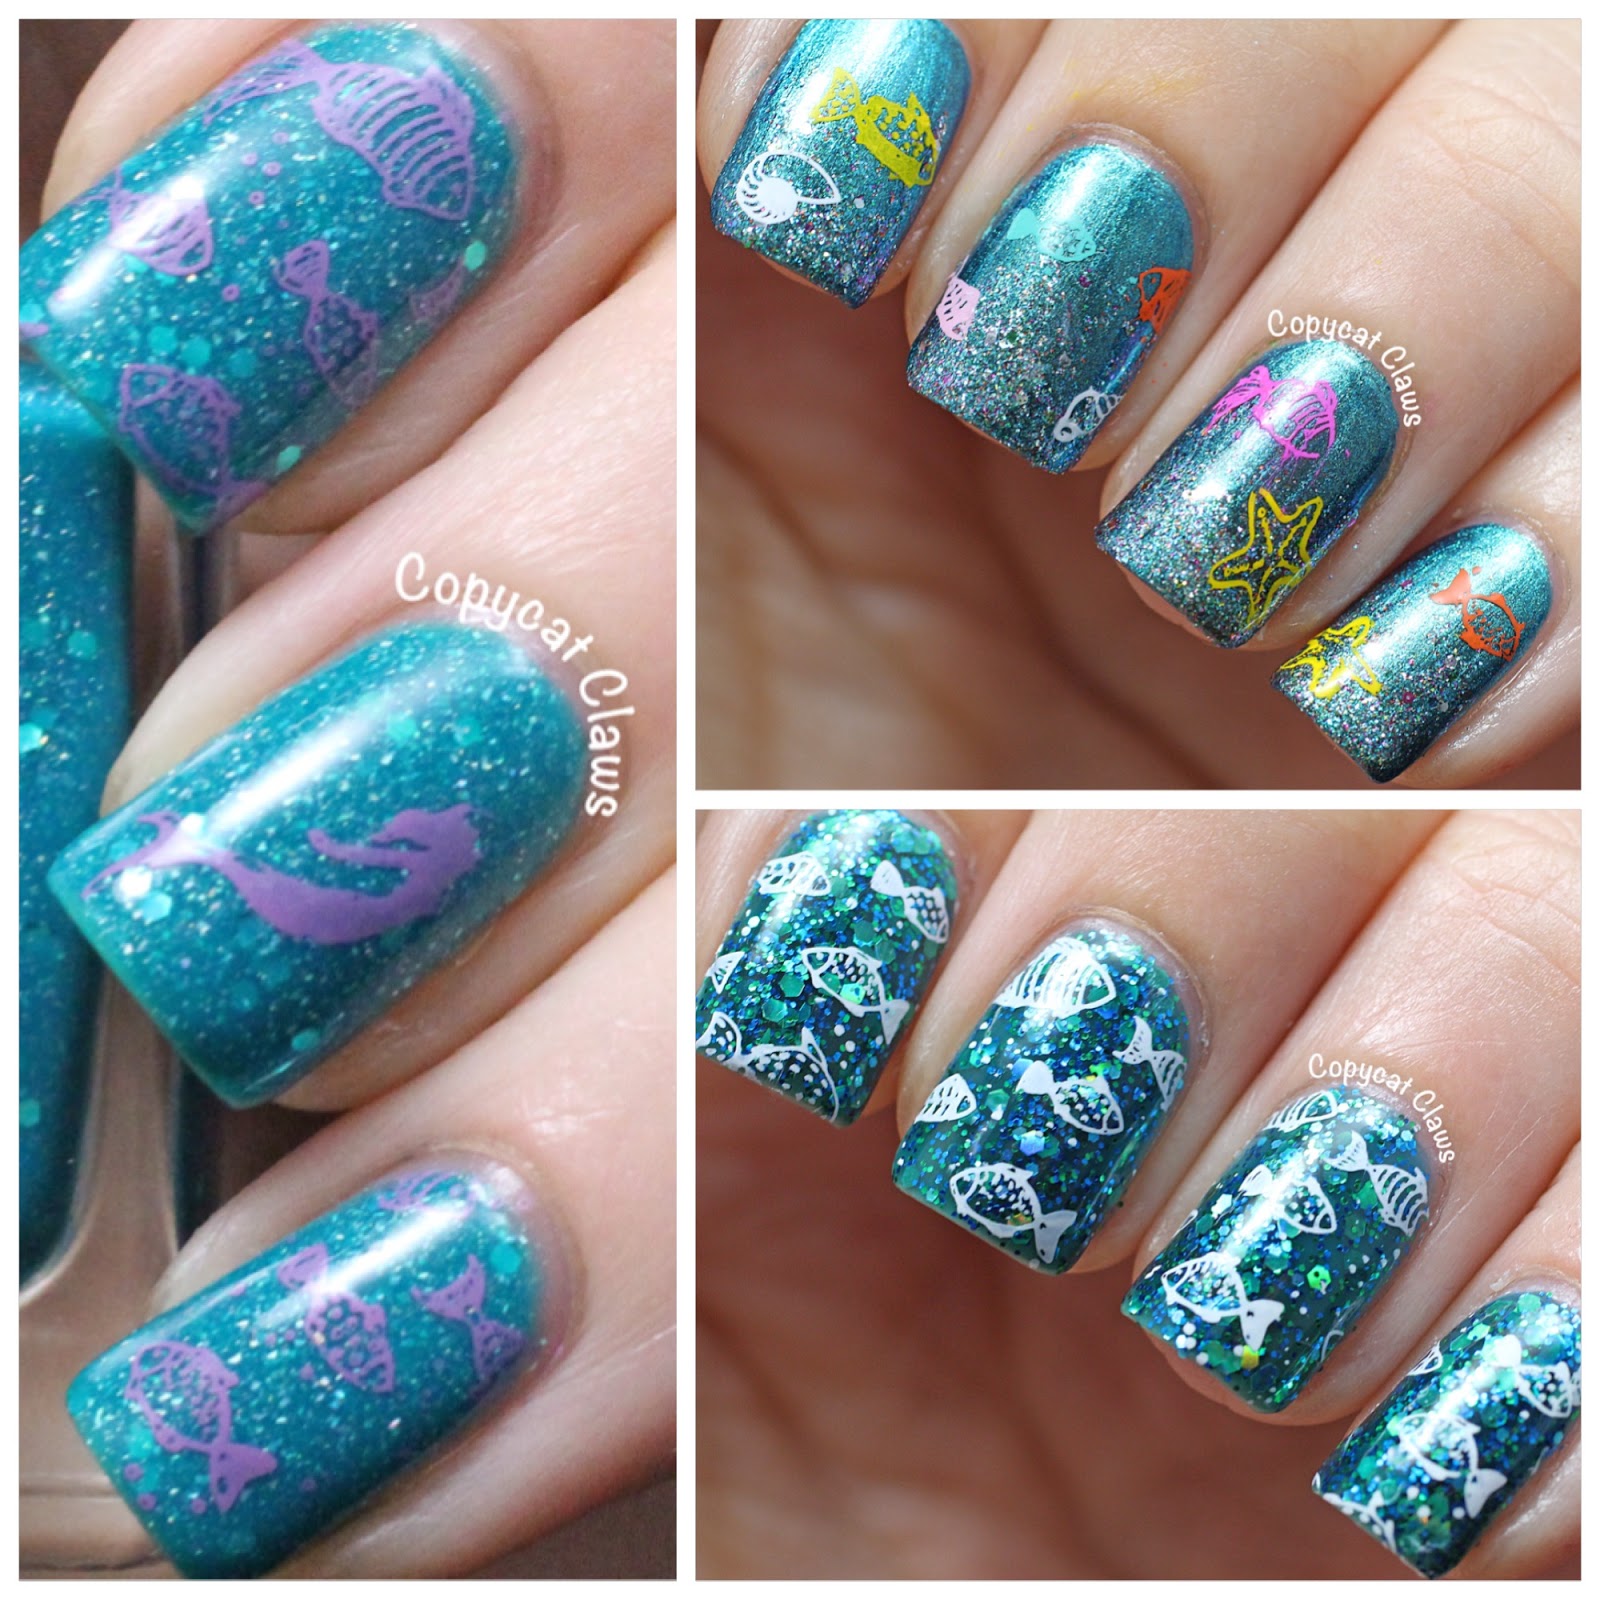 Copycat Claws: Sunday Stamping - Under The Sea